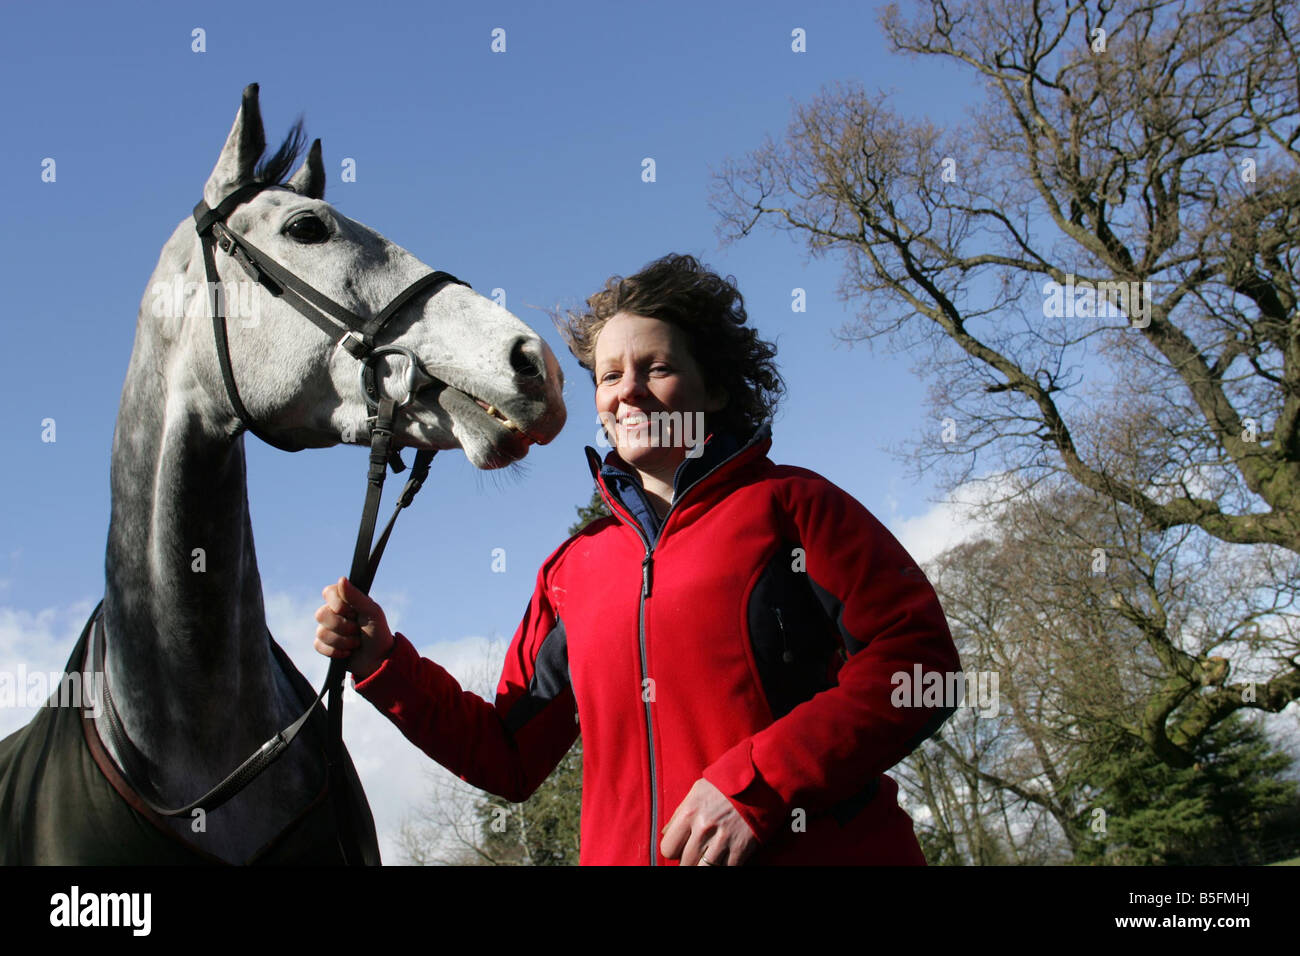 Racehorse Trainer Lucinda Russell with Horse Strong Resolve at their stables near Milnathort in Kinross  Stock Photo